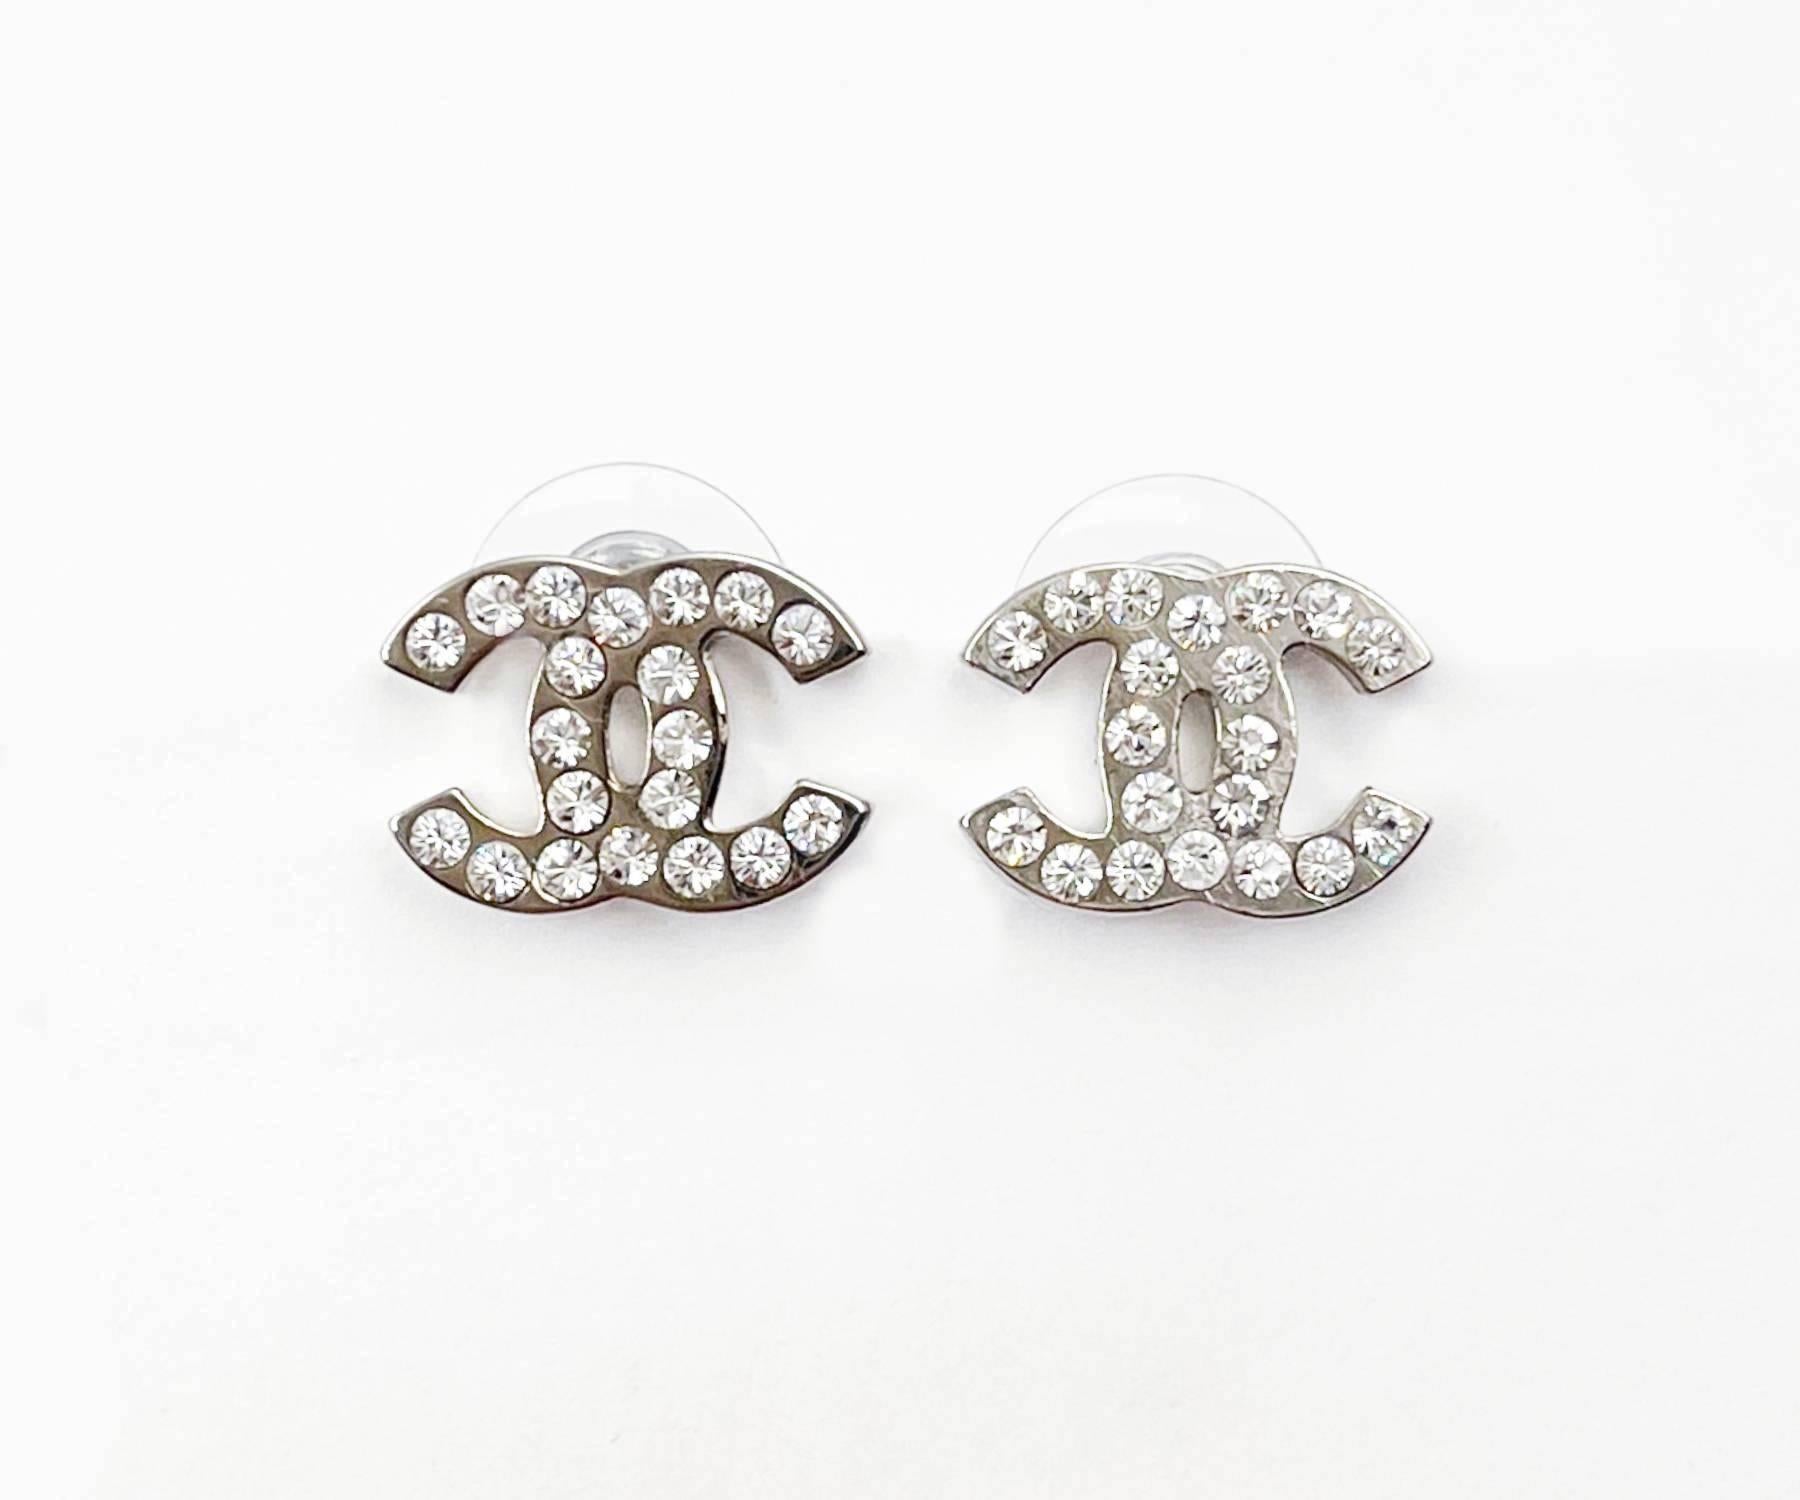 Chanel Classic Silver CC Crystal Medium Piercing Earrings

*Marked 09
*Made in France
*Comes with the original box

-It is approximately 0.6″ x 0.55″.
-This is one of the most coveted and the best selling classic Chanel earrings.
-In an excellent